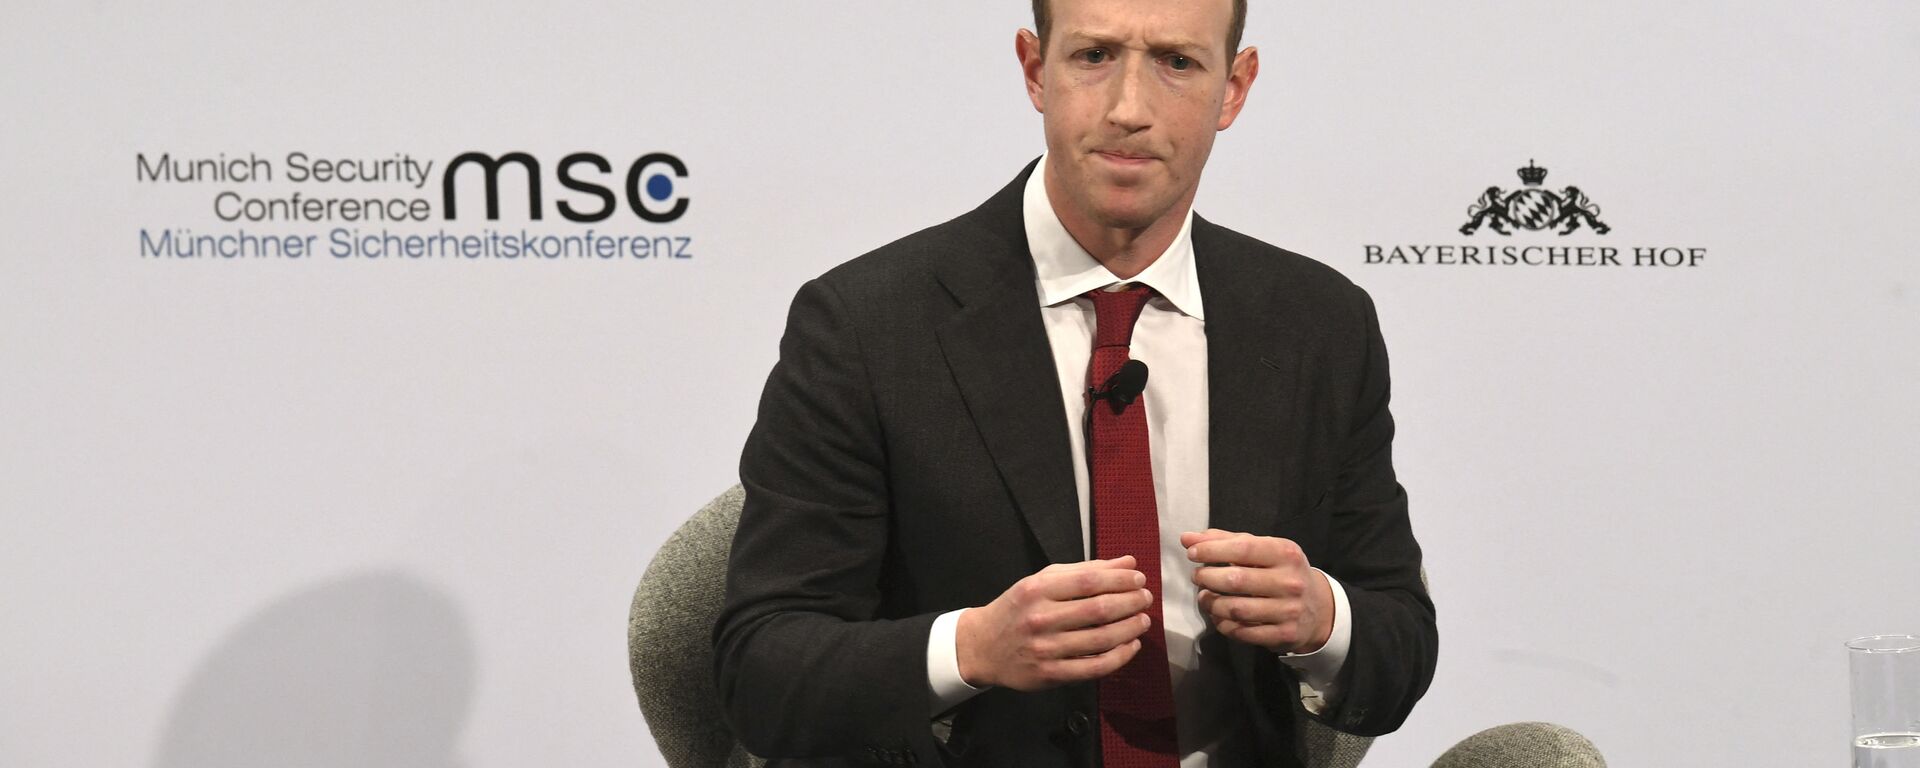 The founder and CEO of Facebook Mark Zuckerberg speaks during the 56th Munich Security Conference (MSC) in Munich, southern Germany, on February 15, 2020. - The 2020 edition of the Munich Security Conference (MSC) takes place from February 14 to 16, 2020.  - Sputnik International, 1920, 05.05.2021